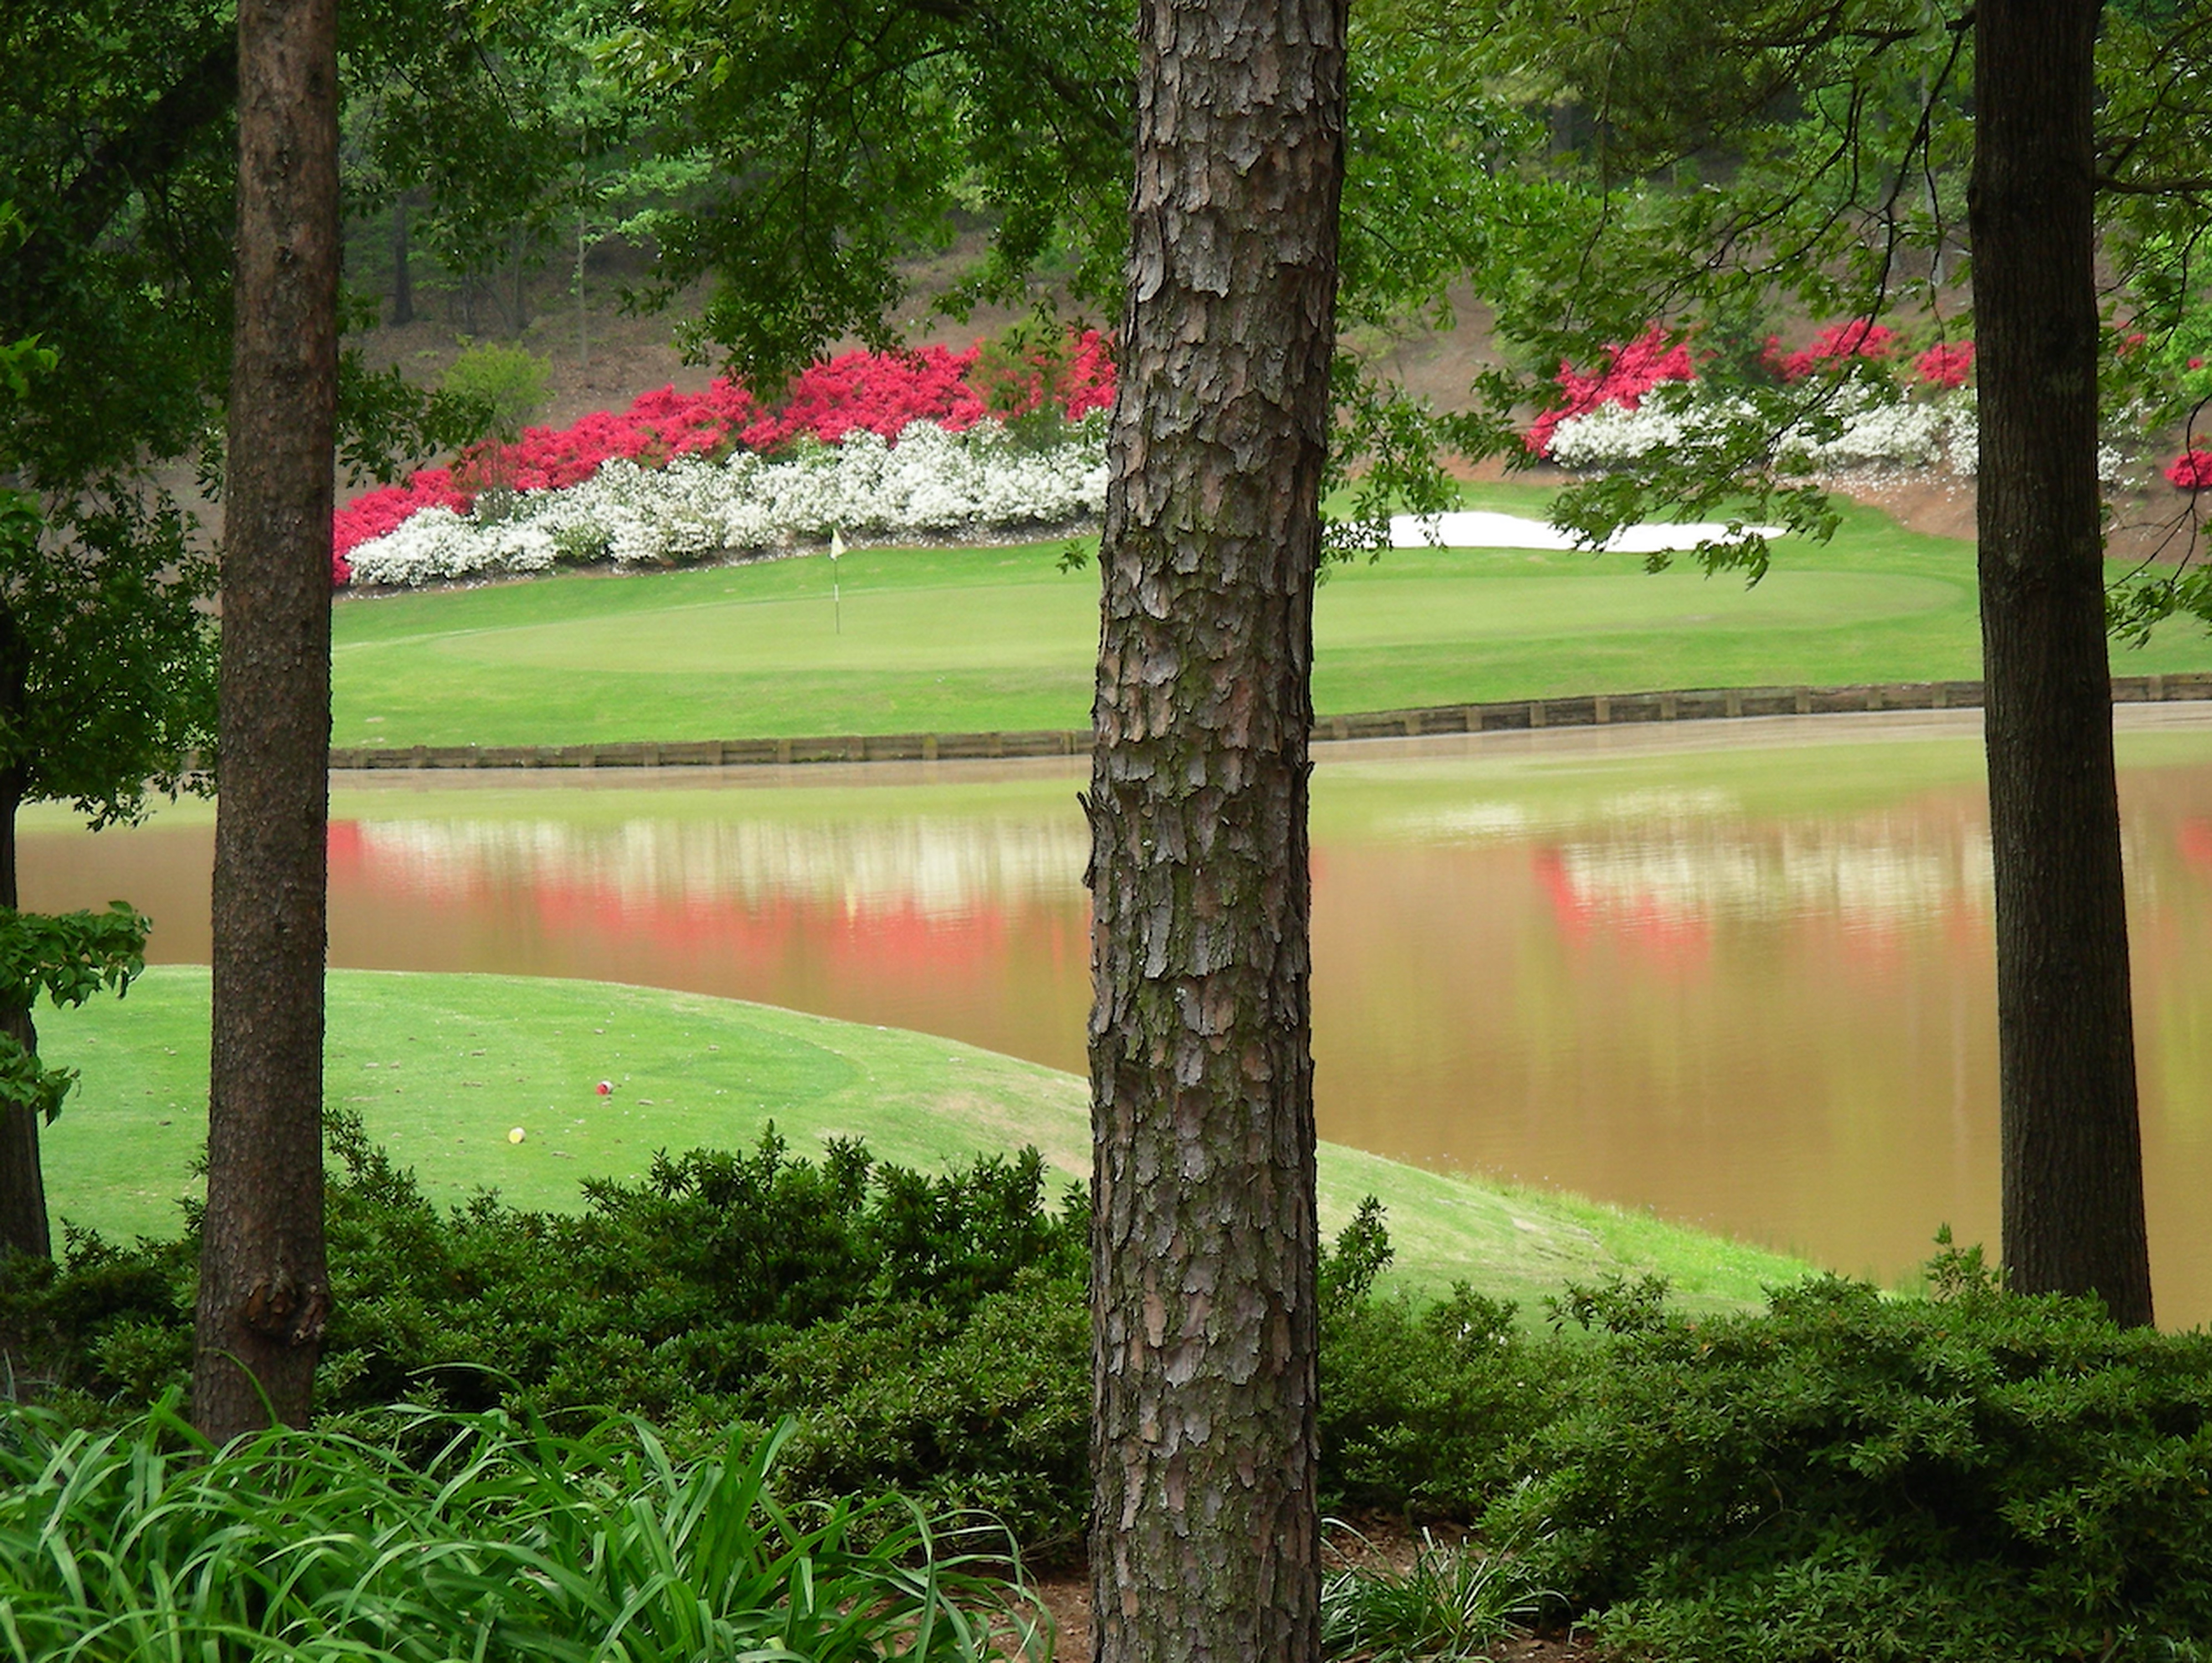 View of water and flowers from the course 